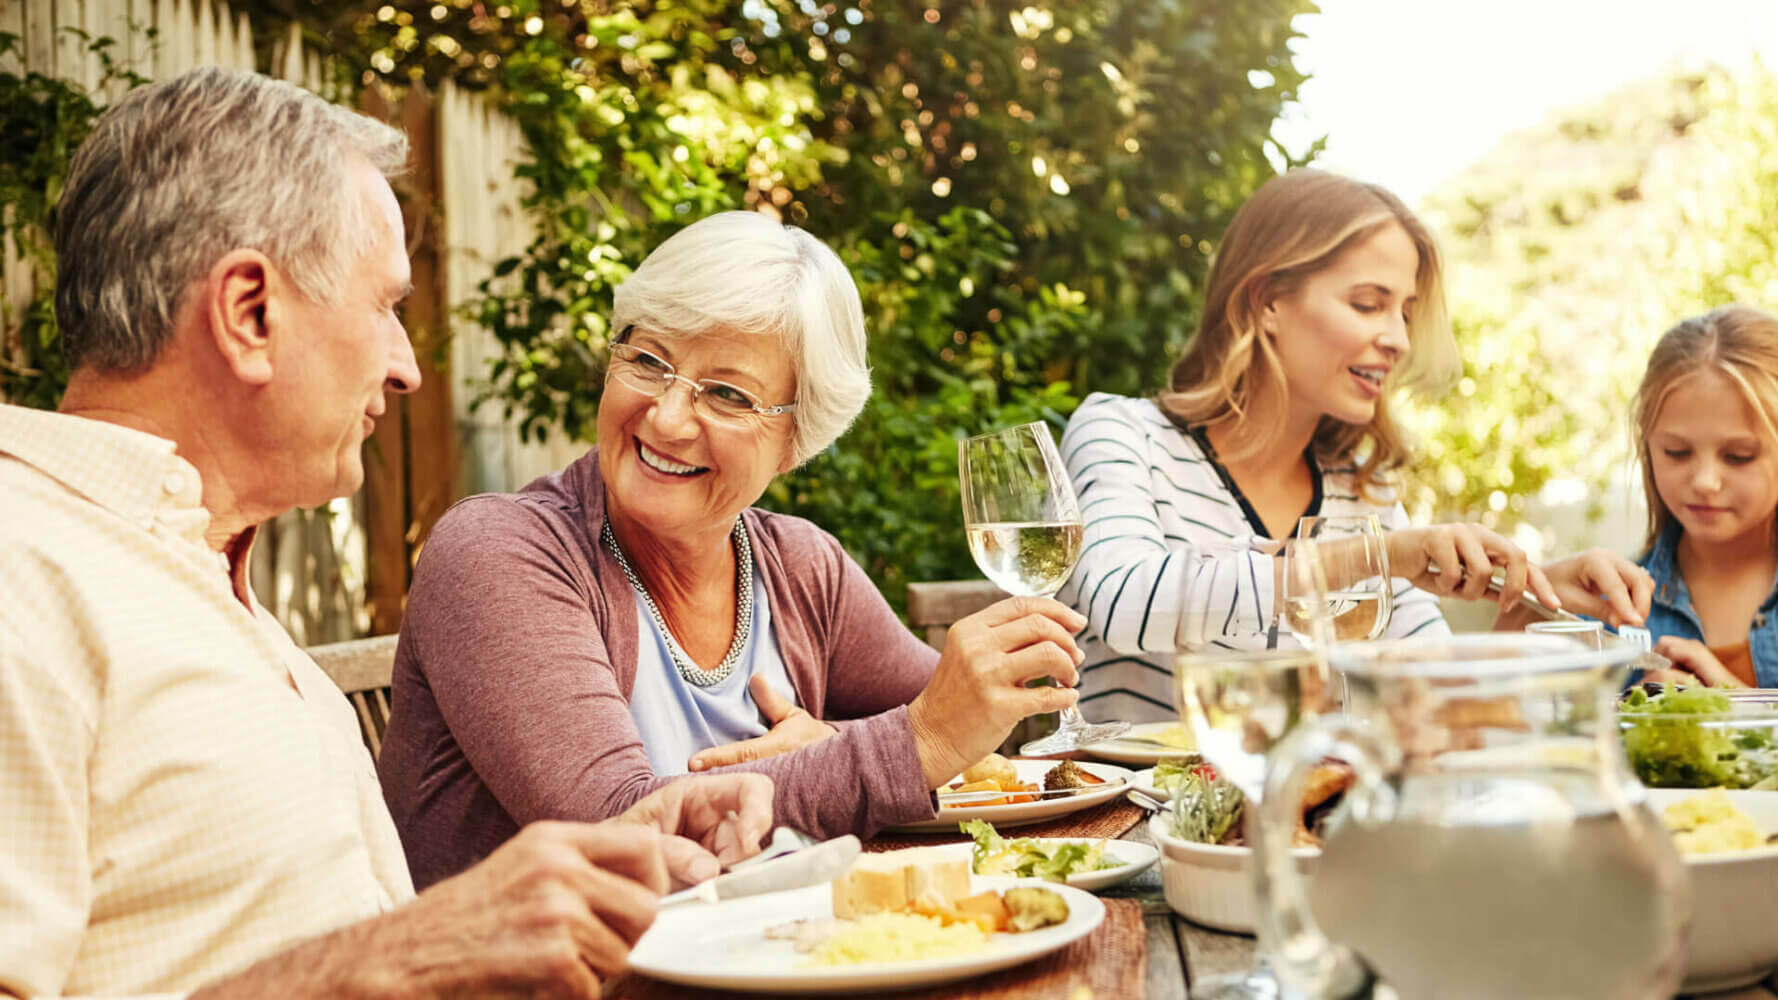 Giving clients the gift of generations as three generations of people in a family sit at a dinner table enjoying a meal together.